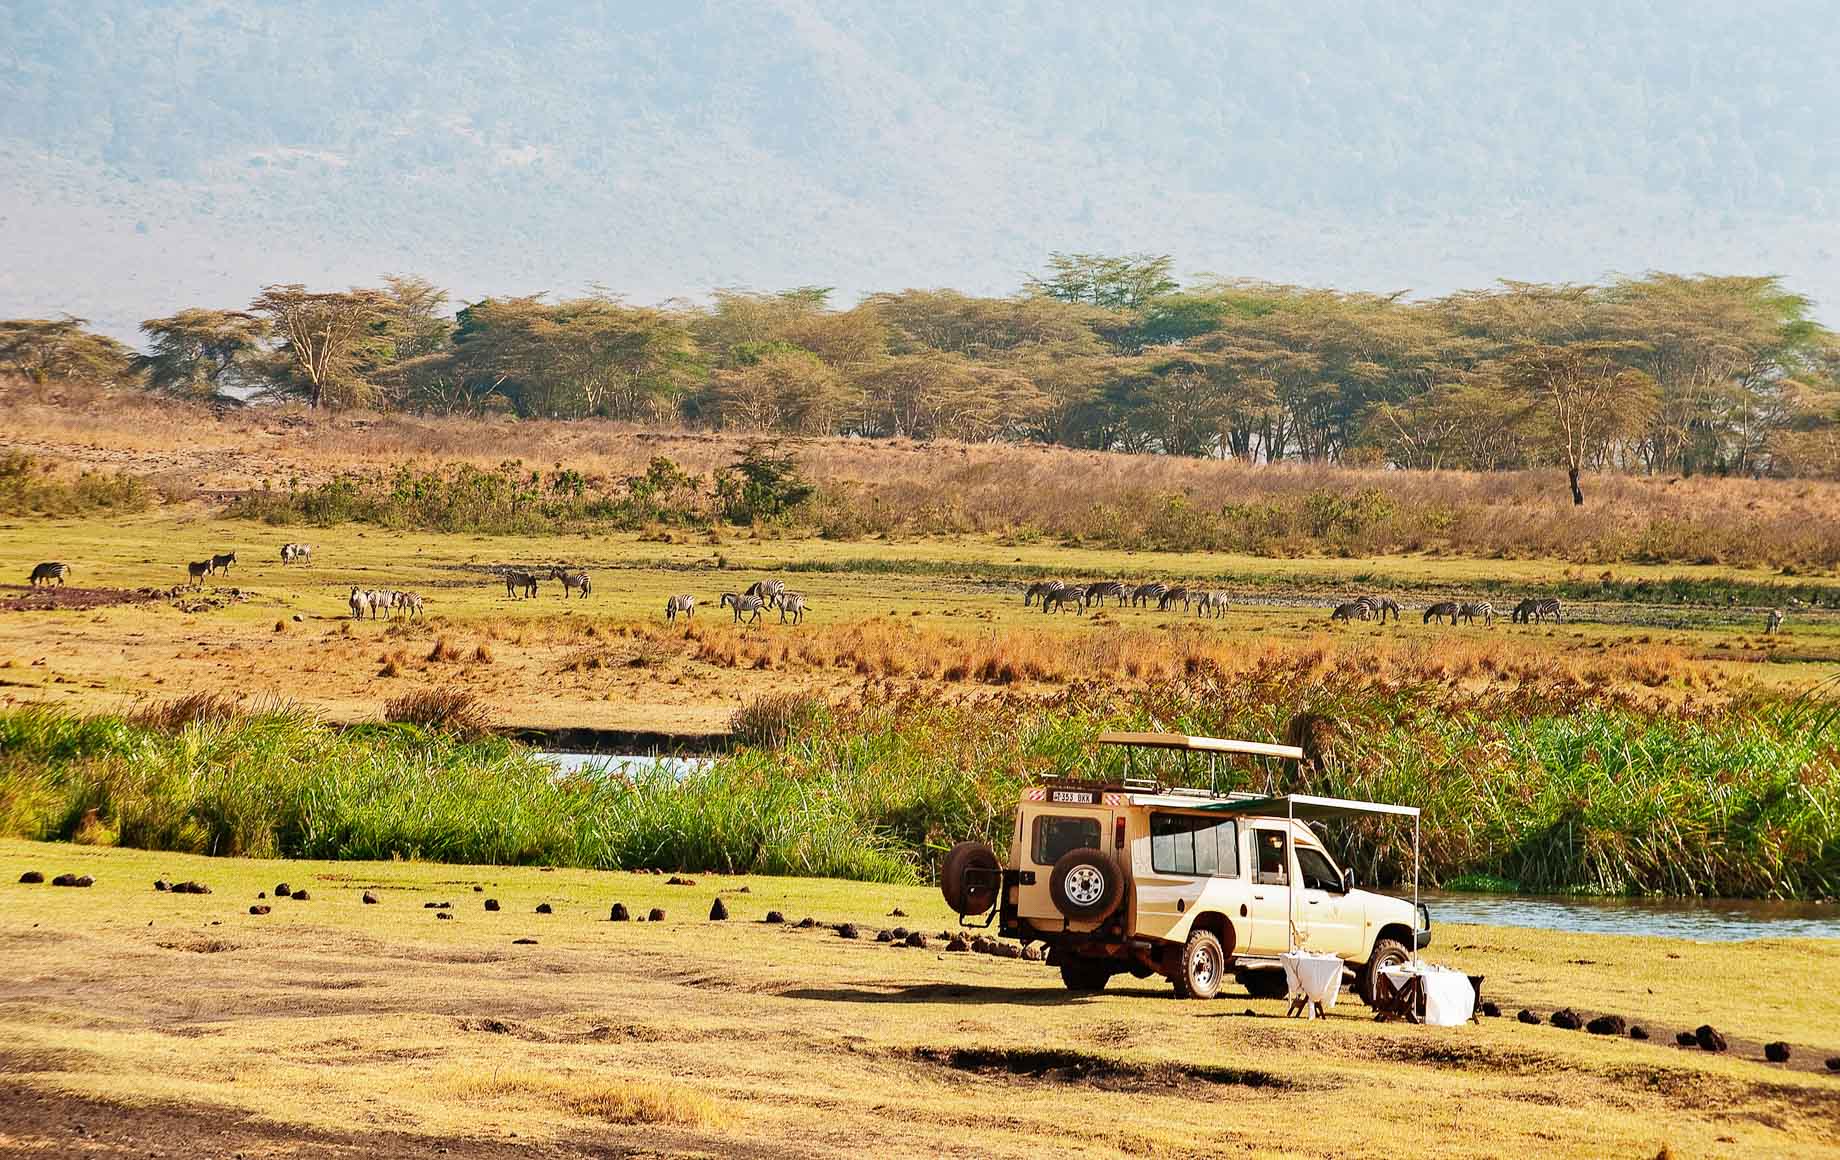 The Ngorongoro Conservation Area expands across rich, diverse wildland, hosting a vast array of wildlife and beautiful, natural tourist destinations